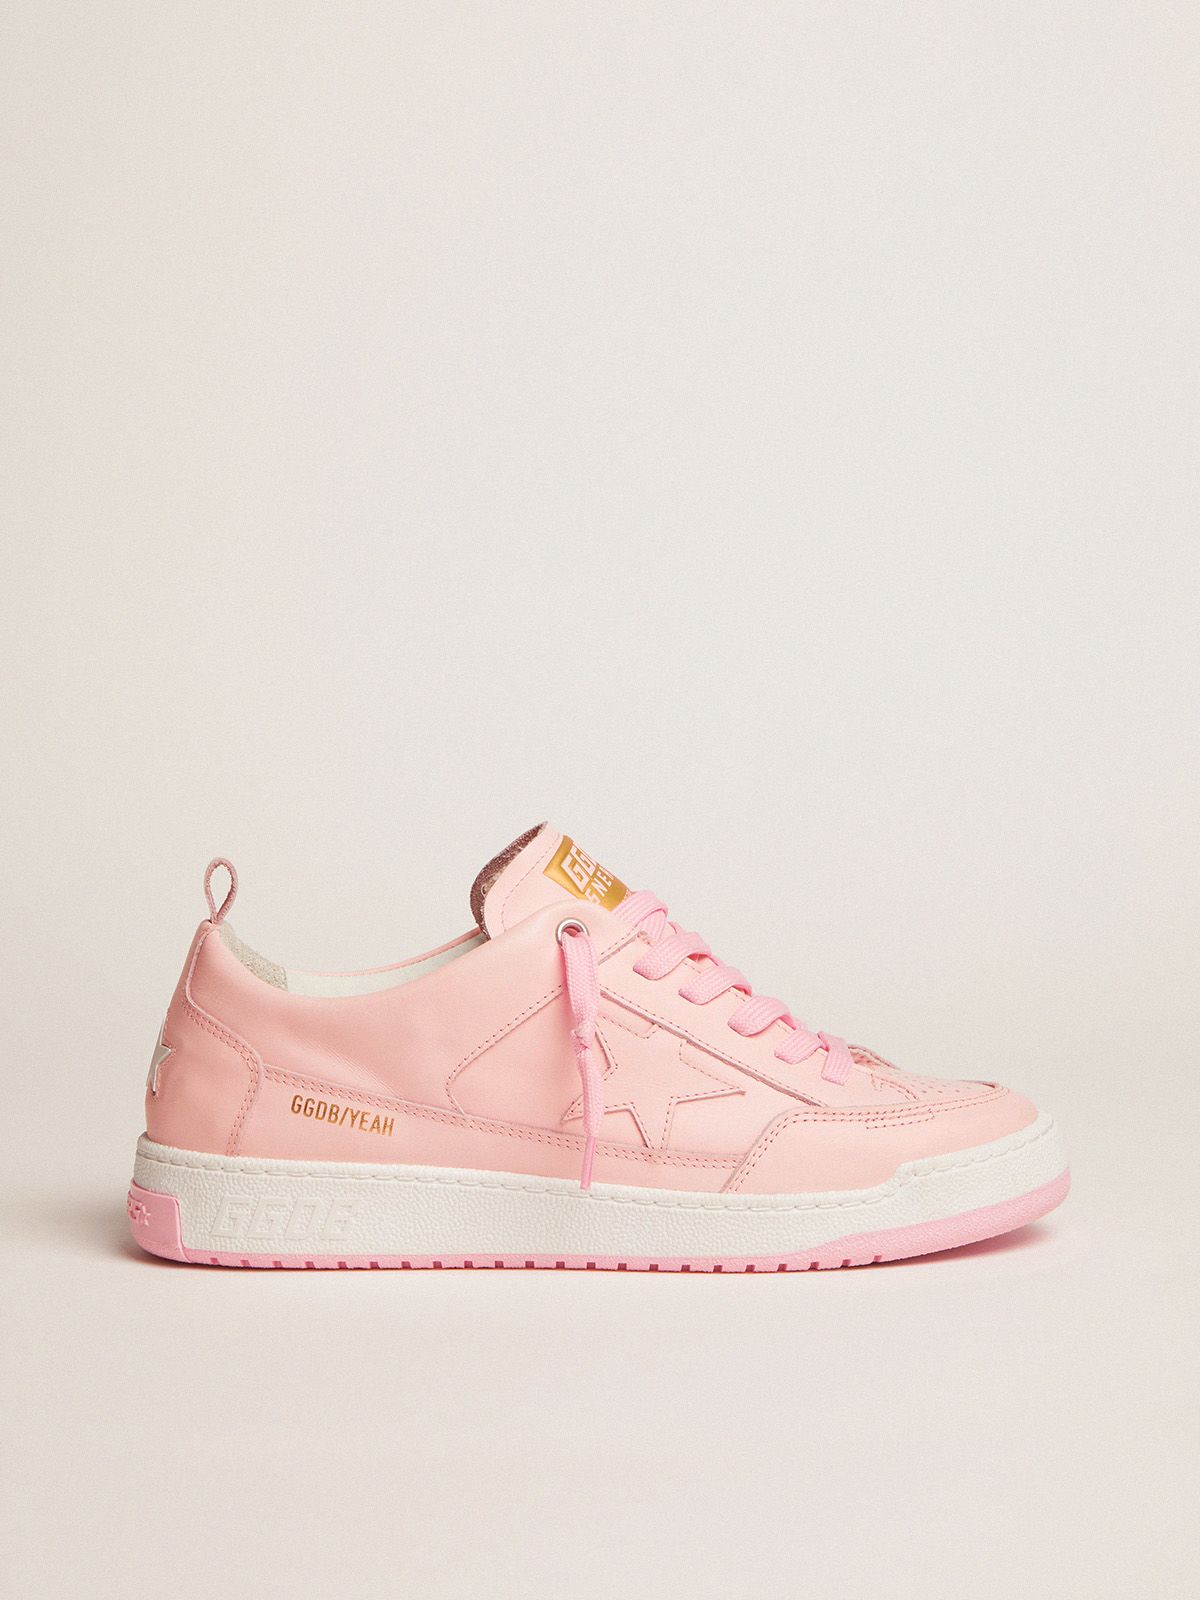 Golden Goose Superstar Yeah sneakers in pale pink leather